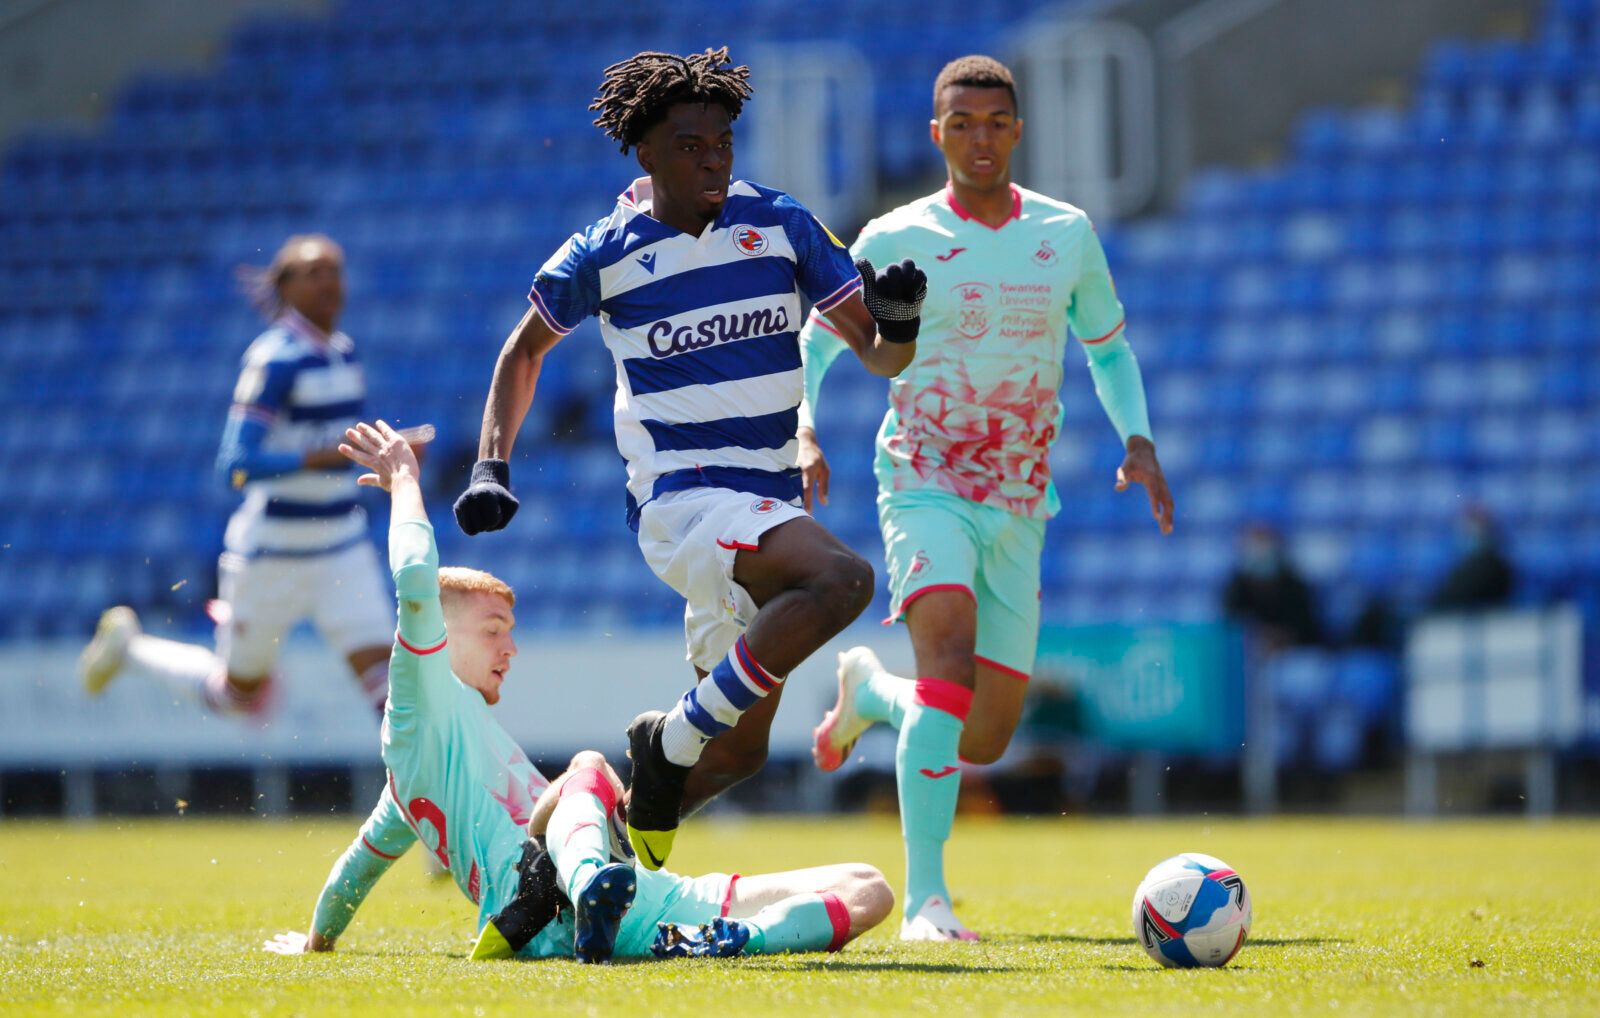 Soccer Football - Championship - Reading v Swansea City - Madejski Stadium, Reading, Britain - April 25, 2021 Reading’s Ovie Ejaria in action with Swansea City's Jay Fulton Action Images/Andrew Couldridge EDITORIAL USE ONLY. No use with unauthorized audio, video, data, fixture lists, club/league logos or 'live' services. Online in-match use limited to 75 images, no video emulation. No use in betting, games or single club /league/player publications.  Please contact your account representative fo